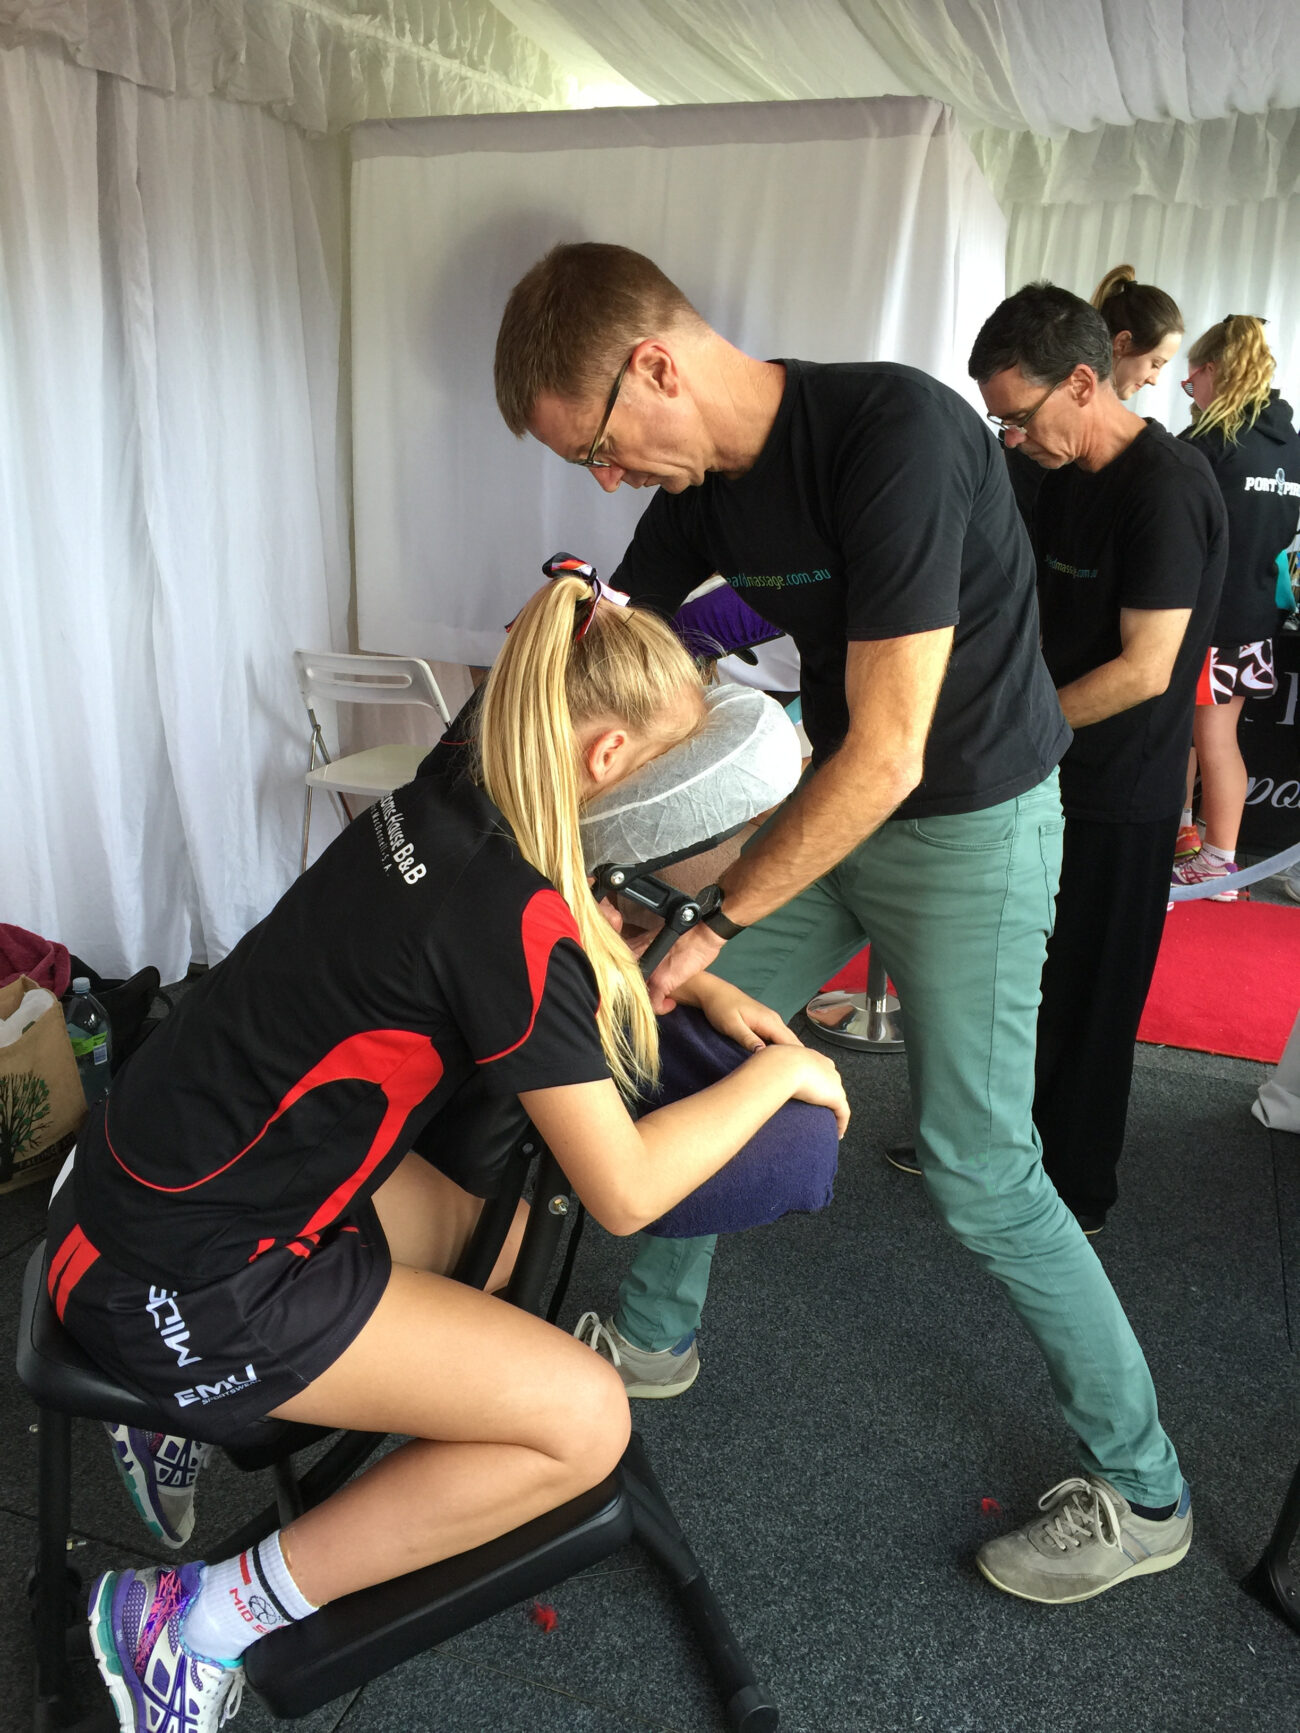 A female athlete gets a massage from Seated Massage at a sporting event